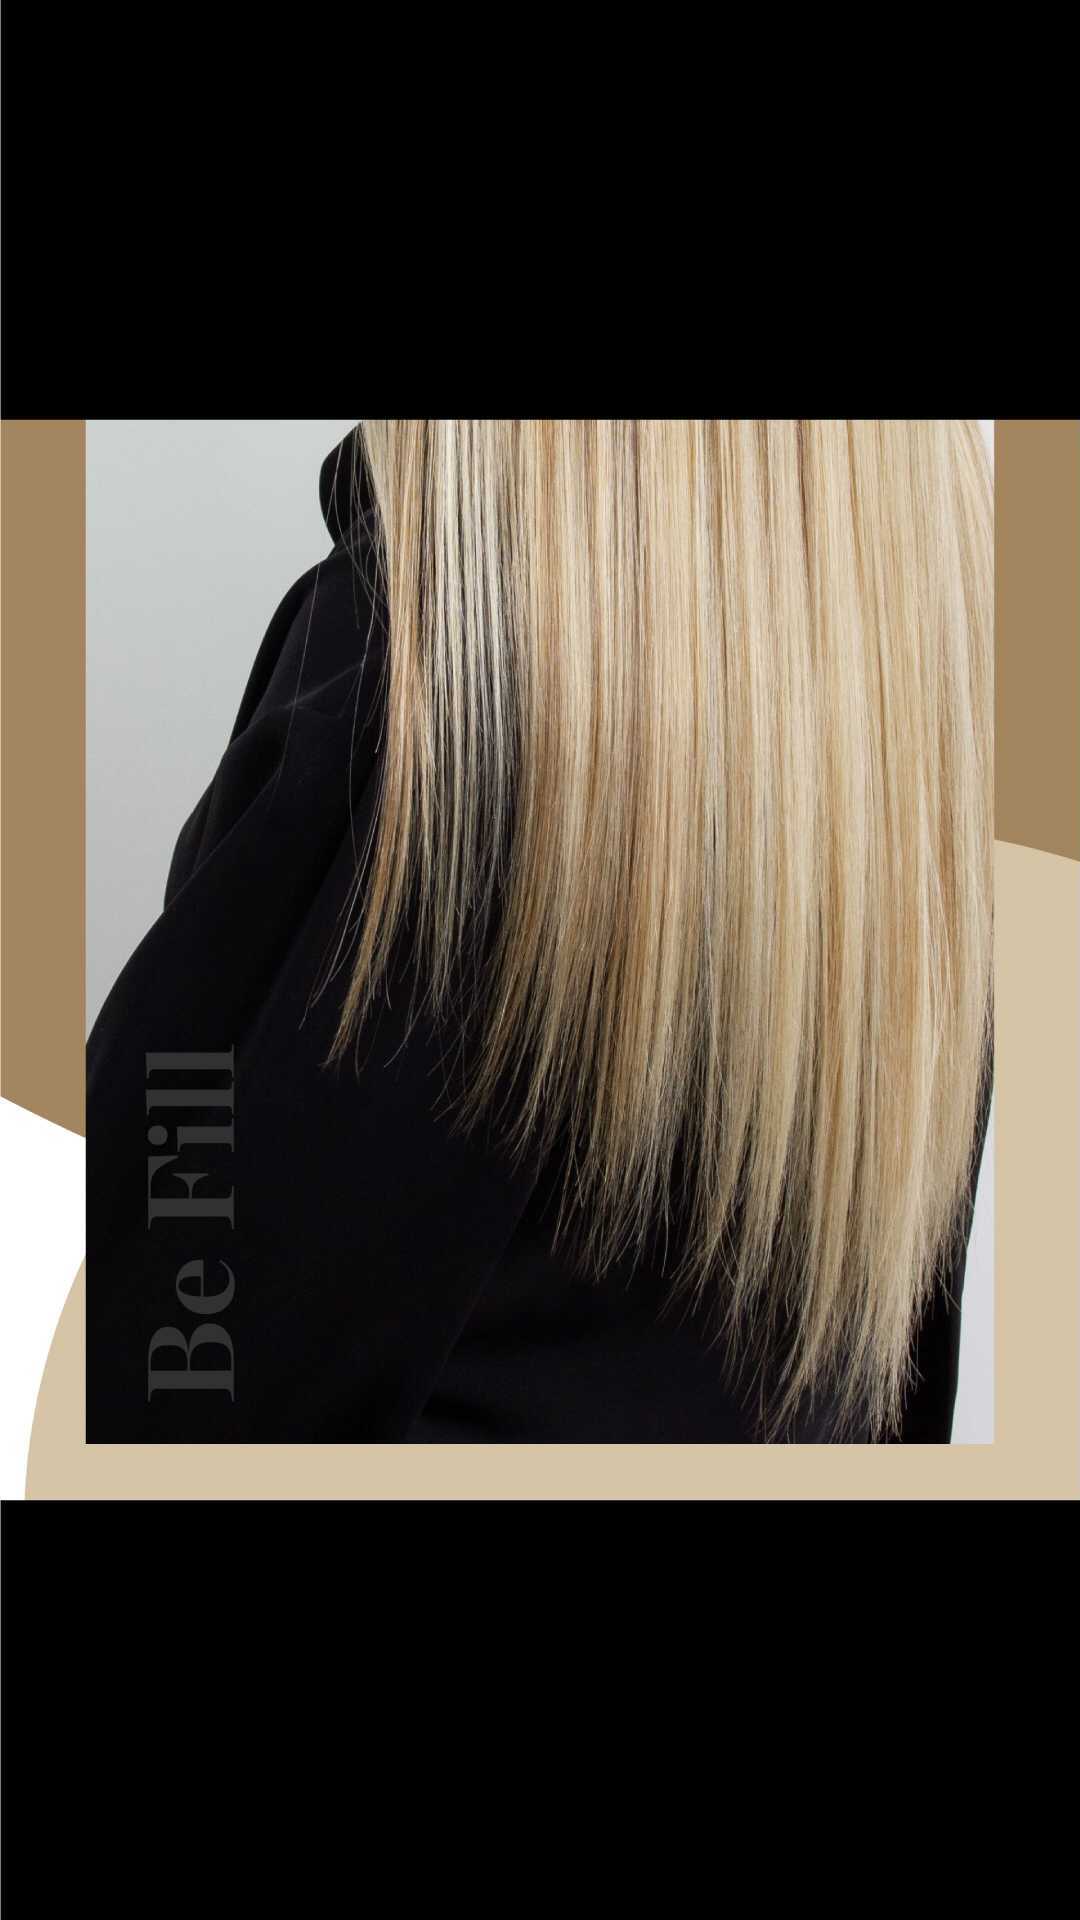 🤩Do you like it? 
Try Be Fill Treatment and make your hair amazing!
.
.
.
🤩Ti piace?
Prova il trattamento Be Fill e rendi i tuoi capelli fantastici!
 
#360professionalhairproducts #hair #treatment #befill #shampoo #relax #keratin #deeplynourishes